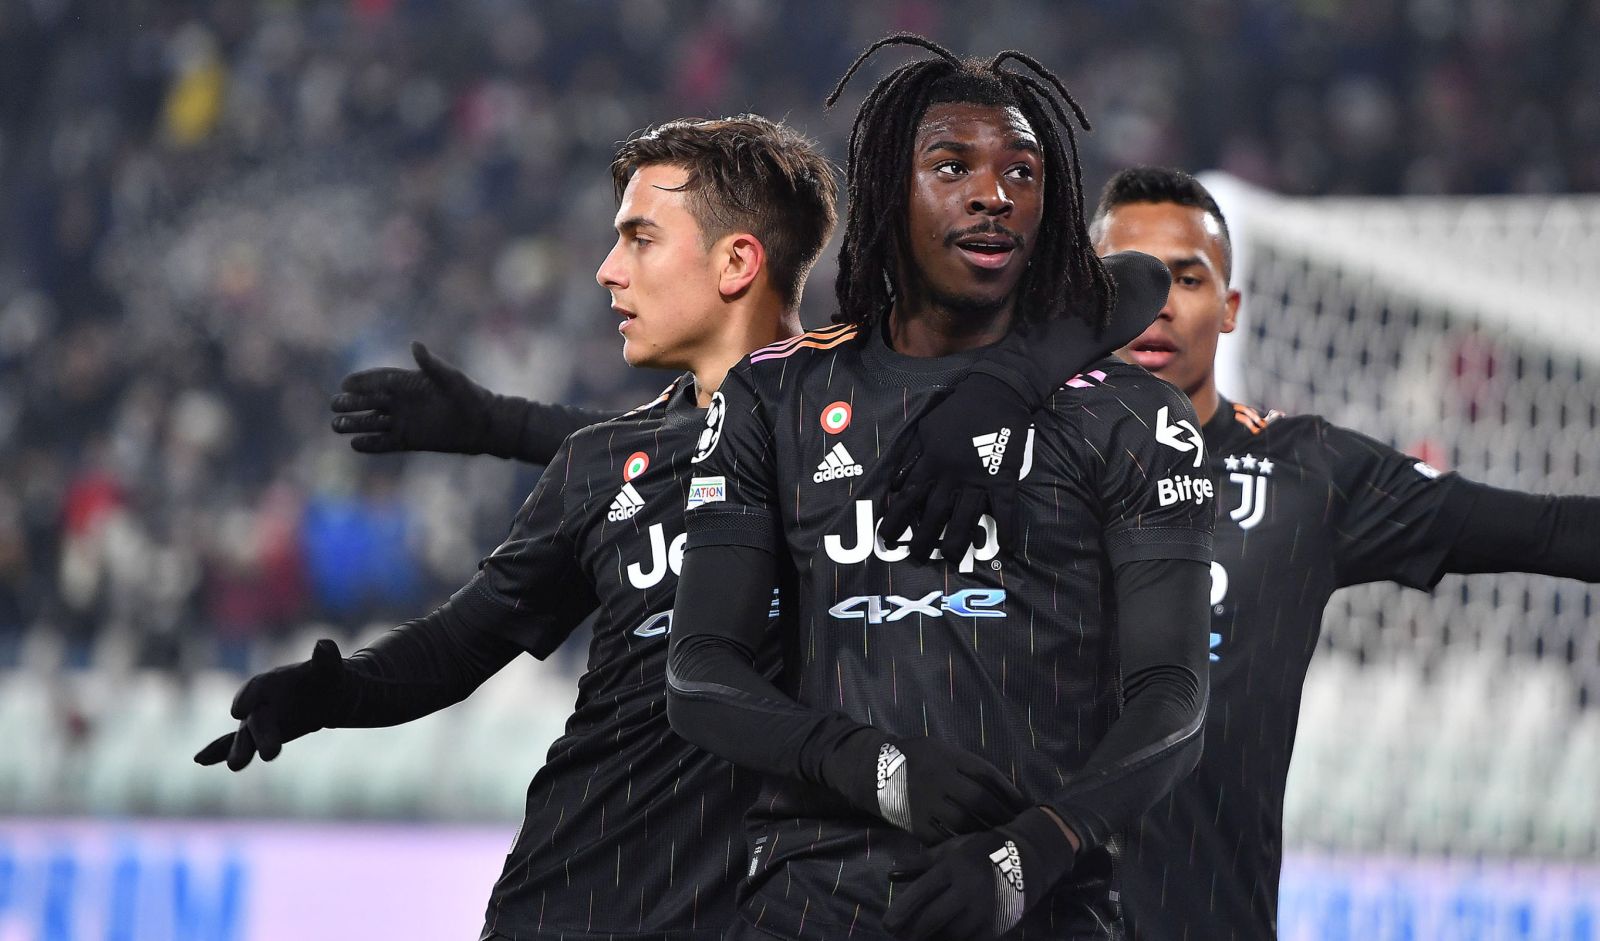 epa09630045 Juventus’ Moise Kean (C) celebrates after scoring the 1-0 gol during the UEFA Champions League group H soccer match Juventus FC vs Malmo at the Allianz Stadium in Turin, Italy, 08 december 2021.  EPA/ALESSANDRO DI MARCO